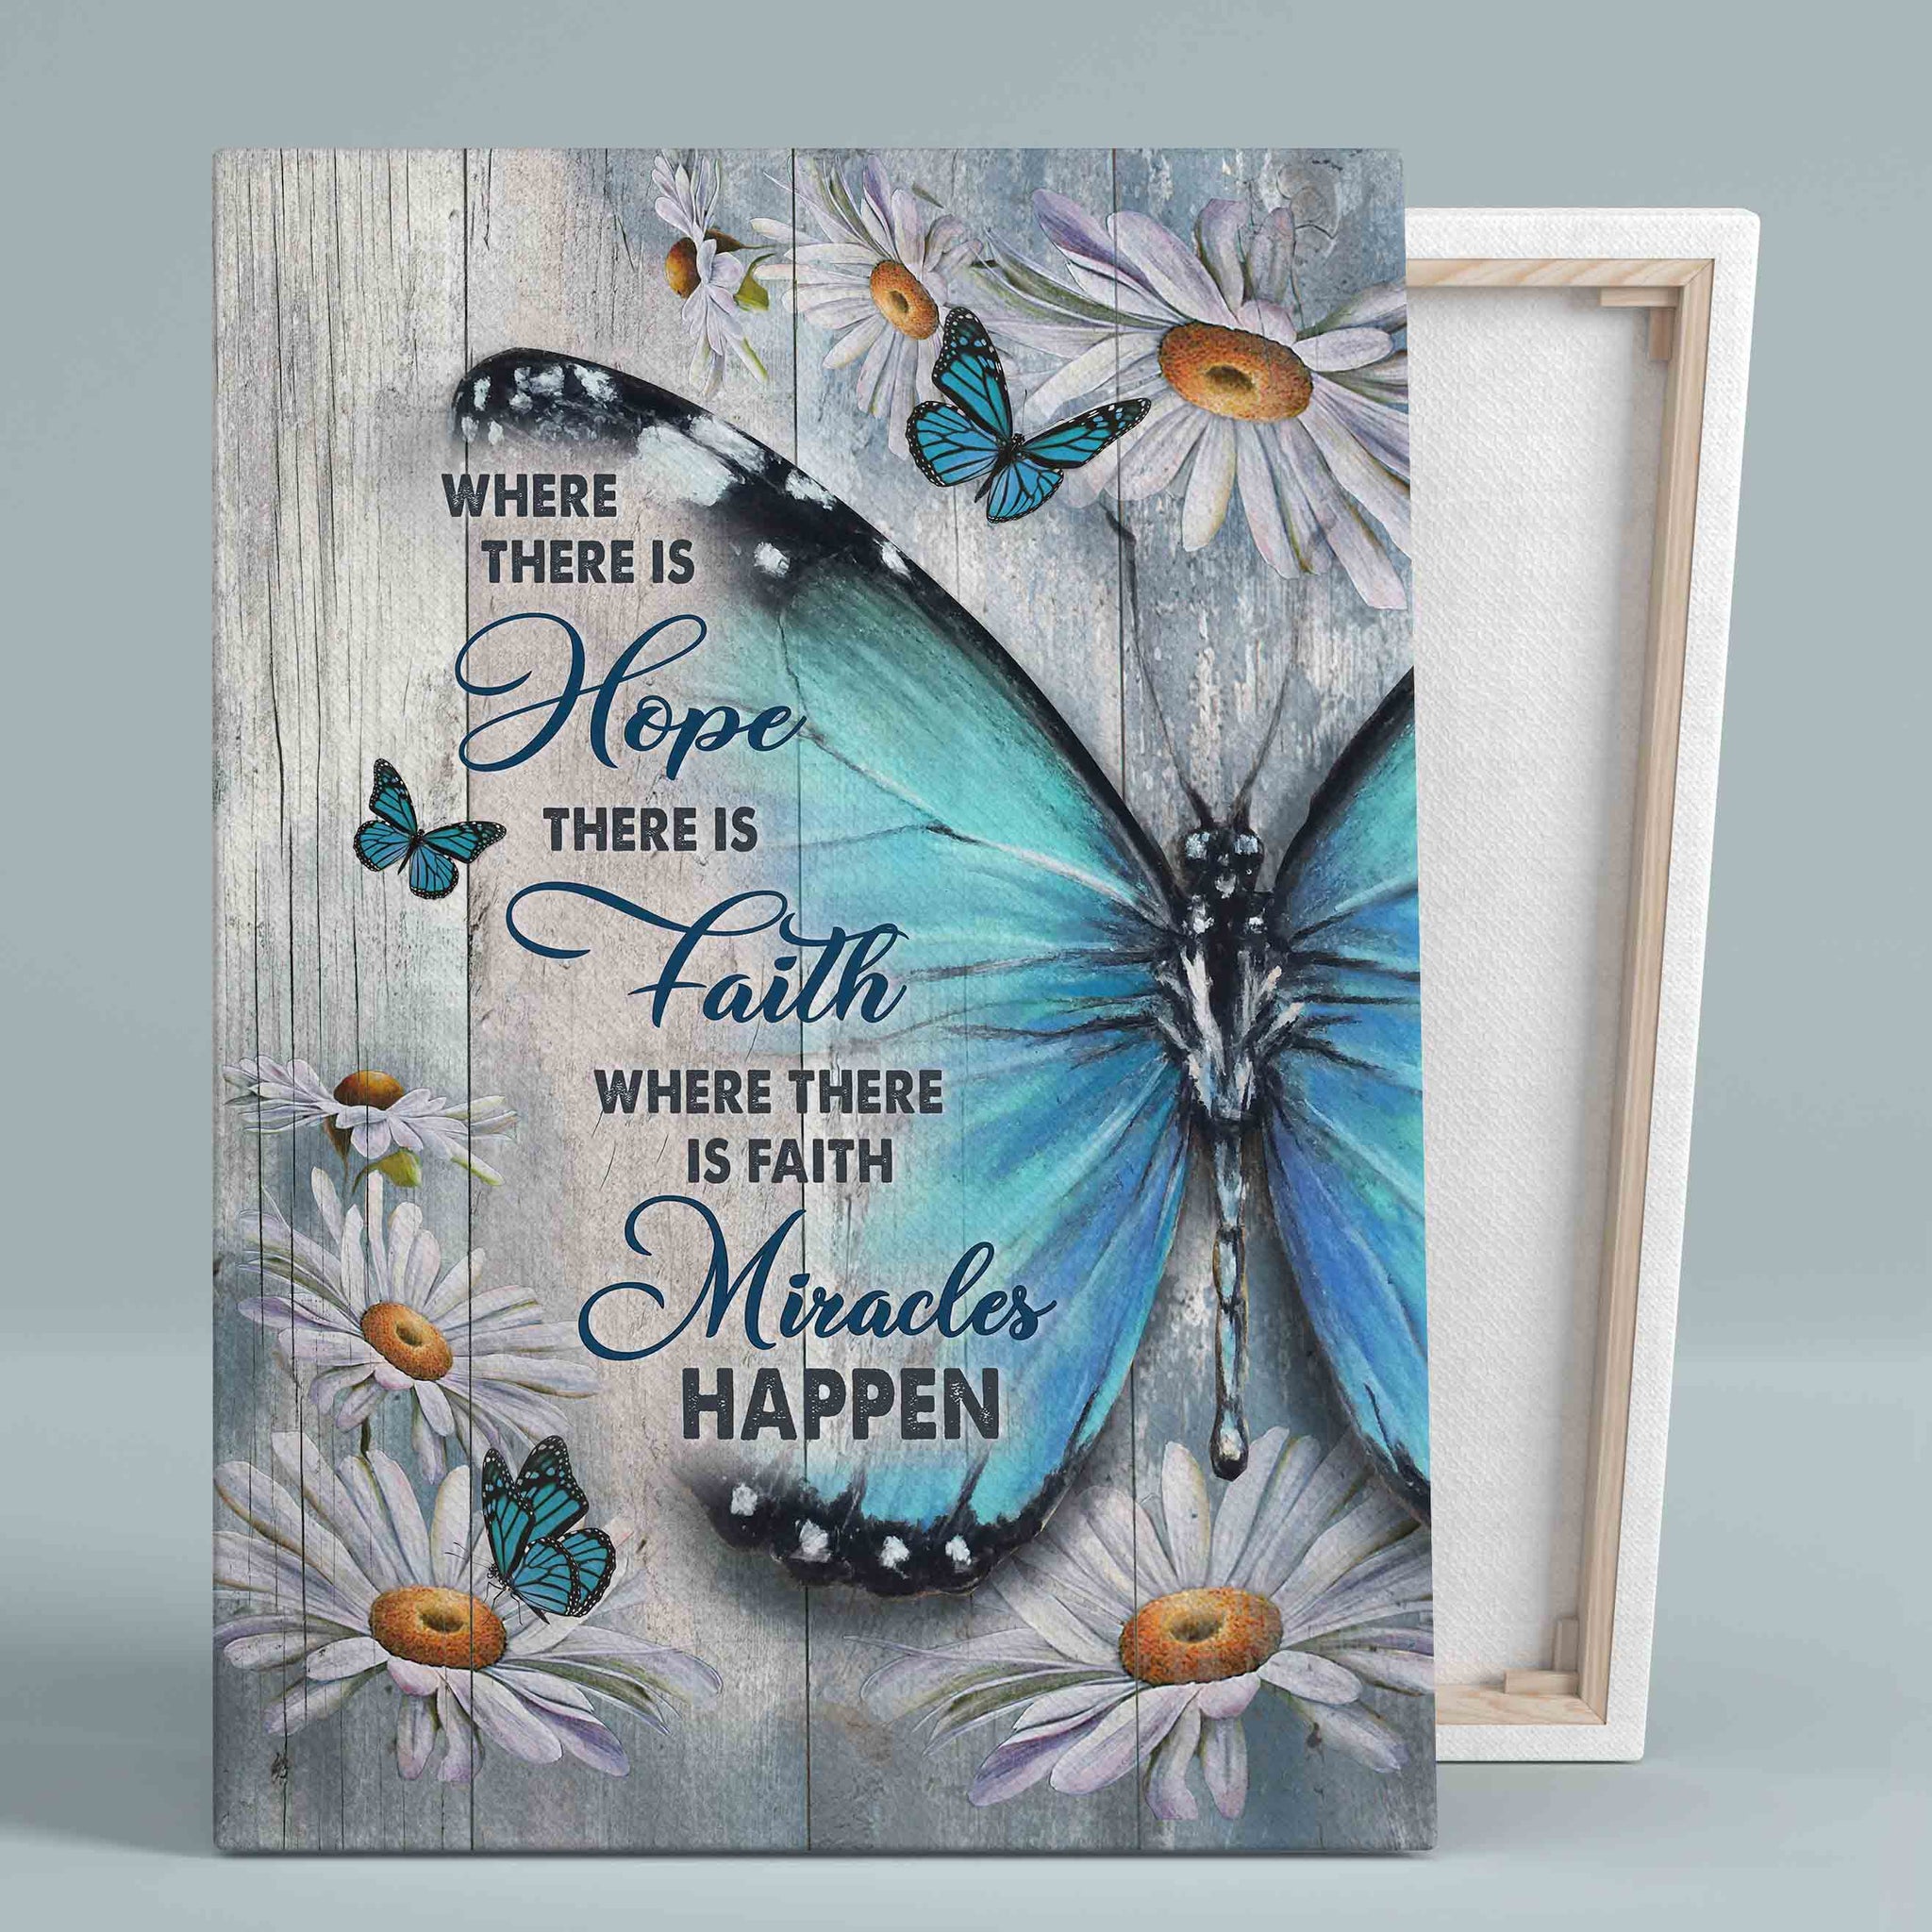 Where There Is Hope There Is Faith Canvas, Butterfly Canvas, Daisy Canvas, Christian Wall Art Canvas, Canvas Wall Decor, Gift Canvas